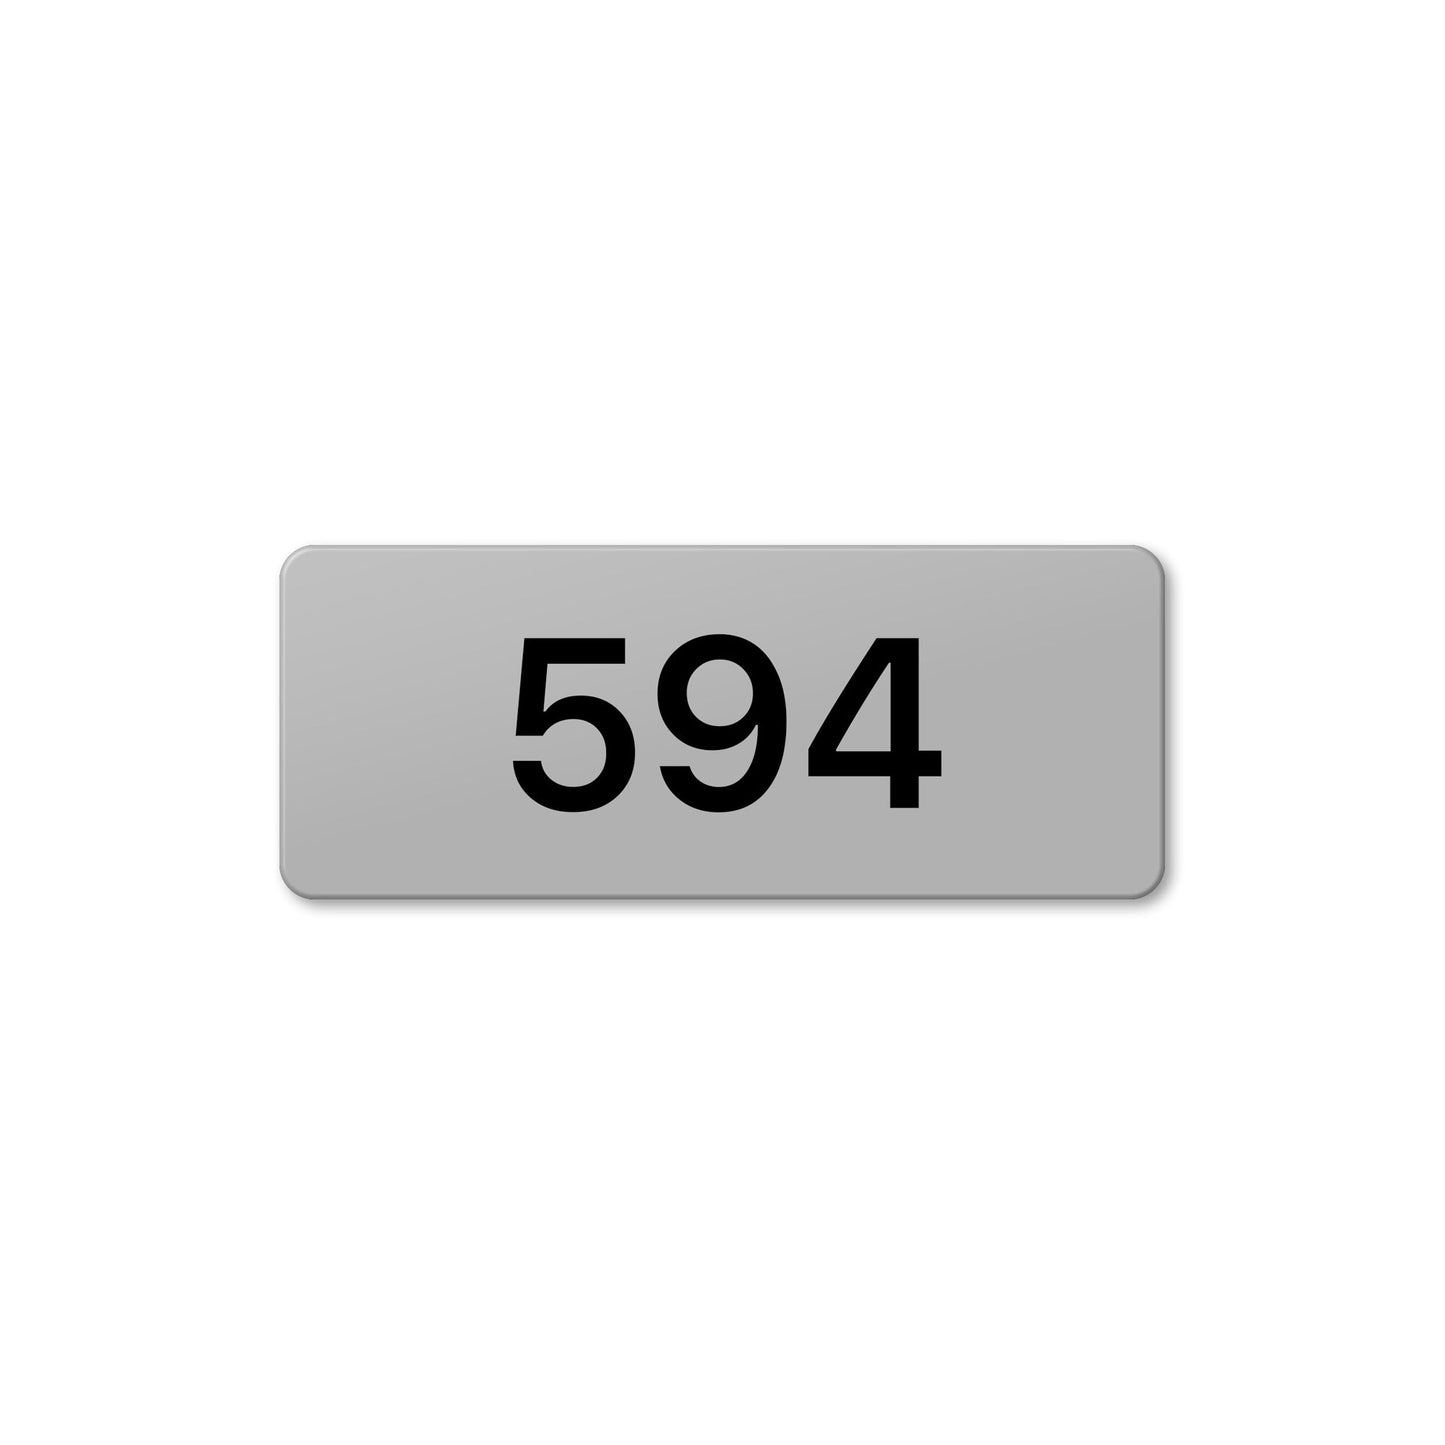 Numeral 594